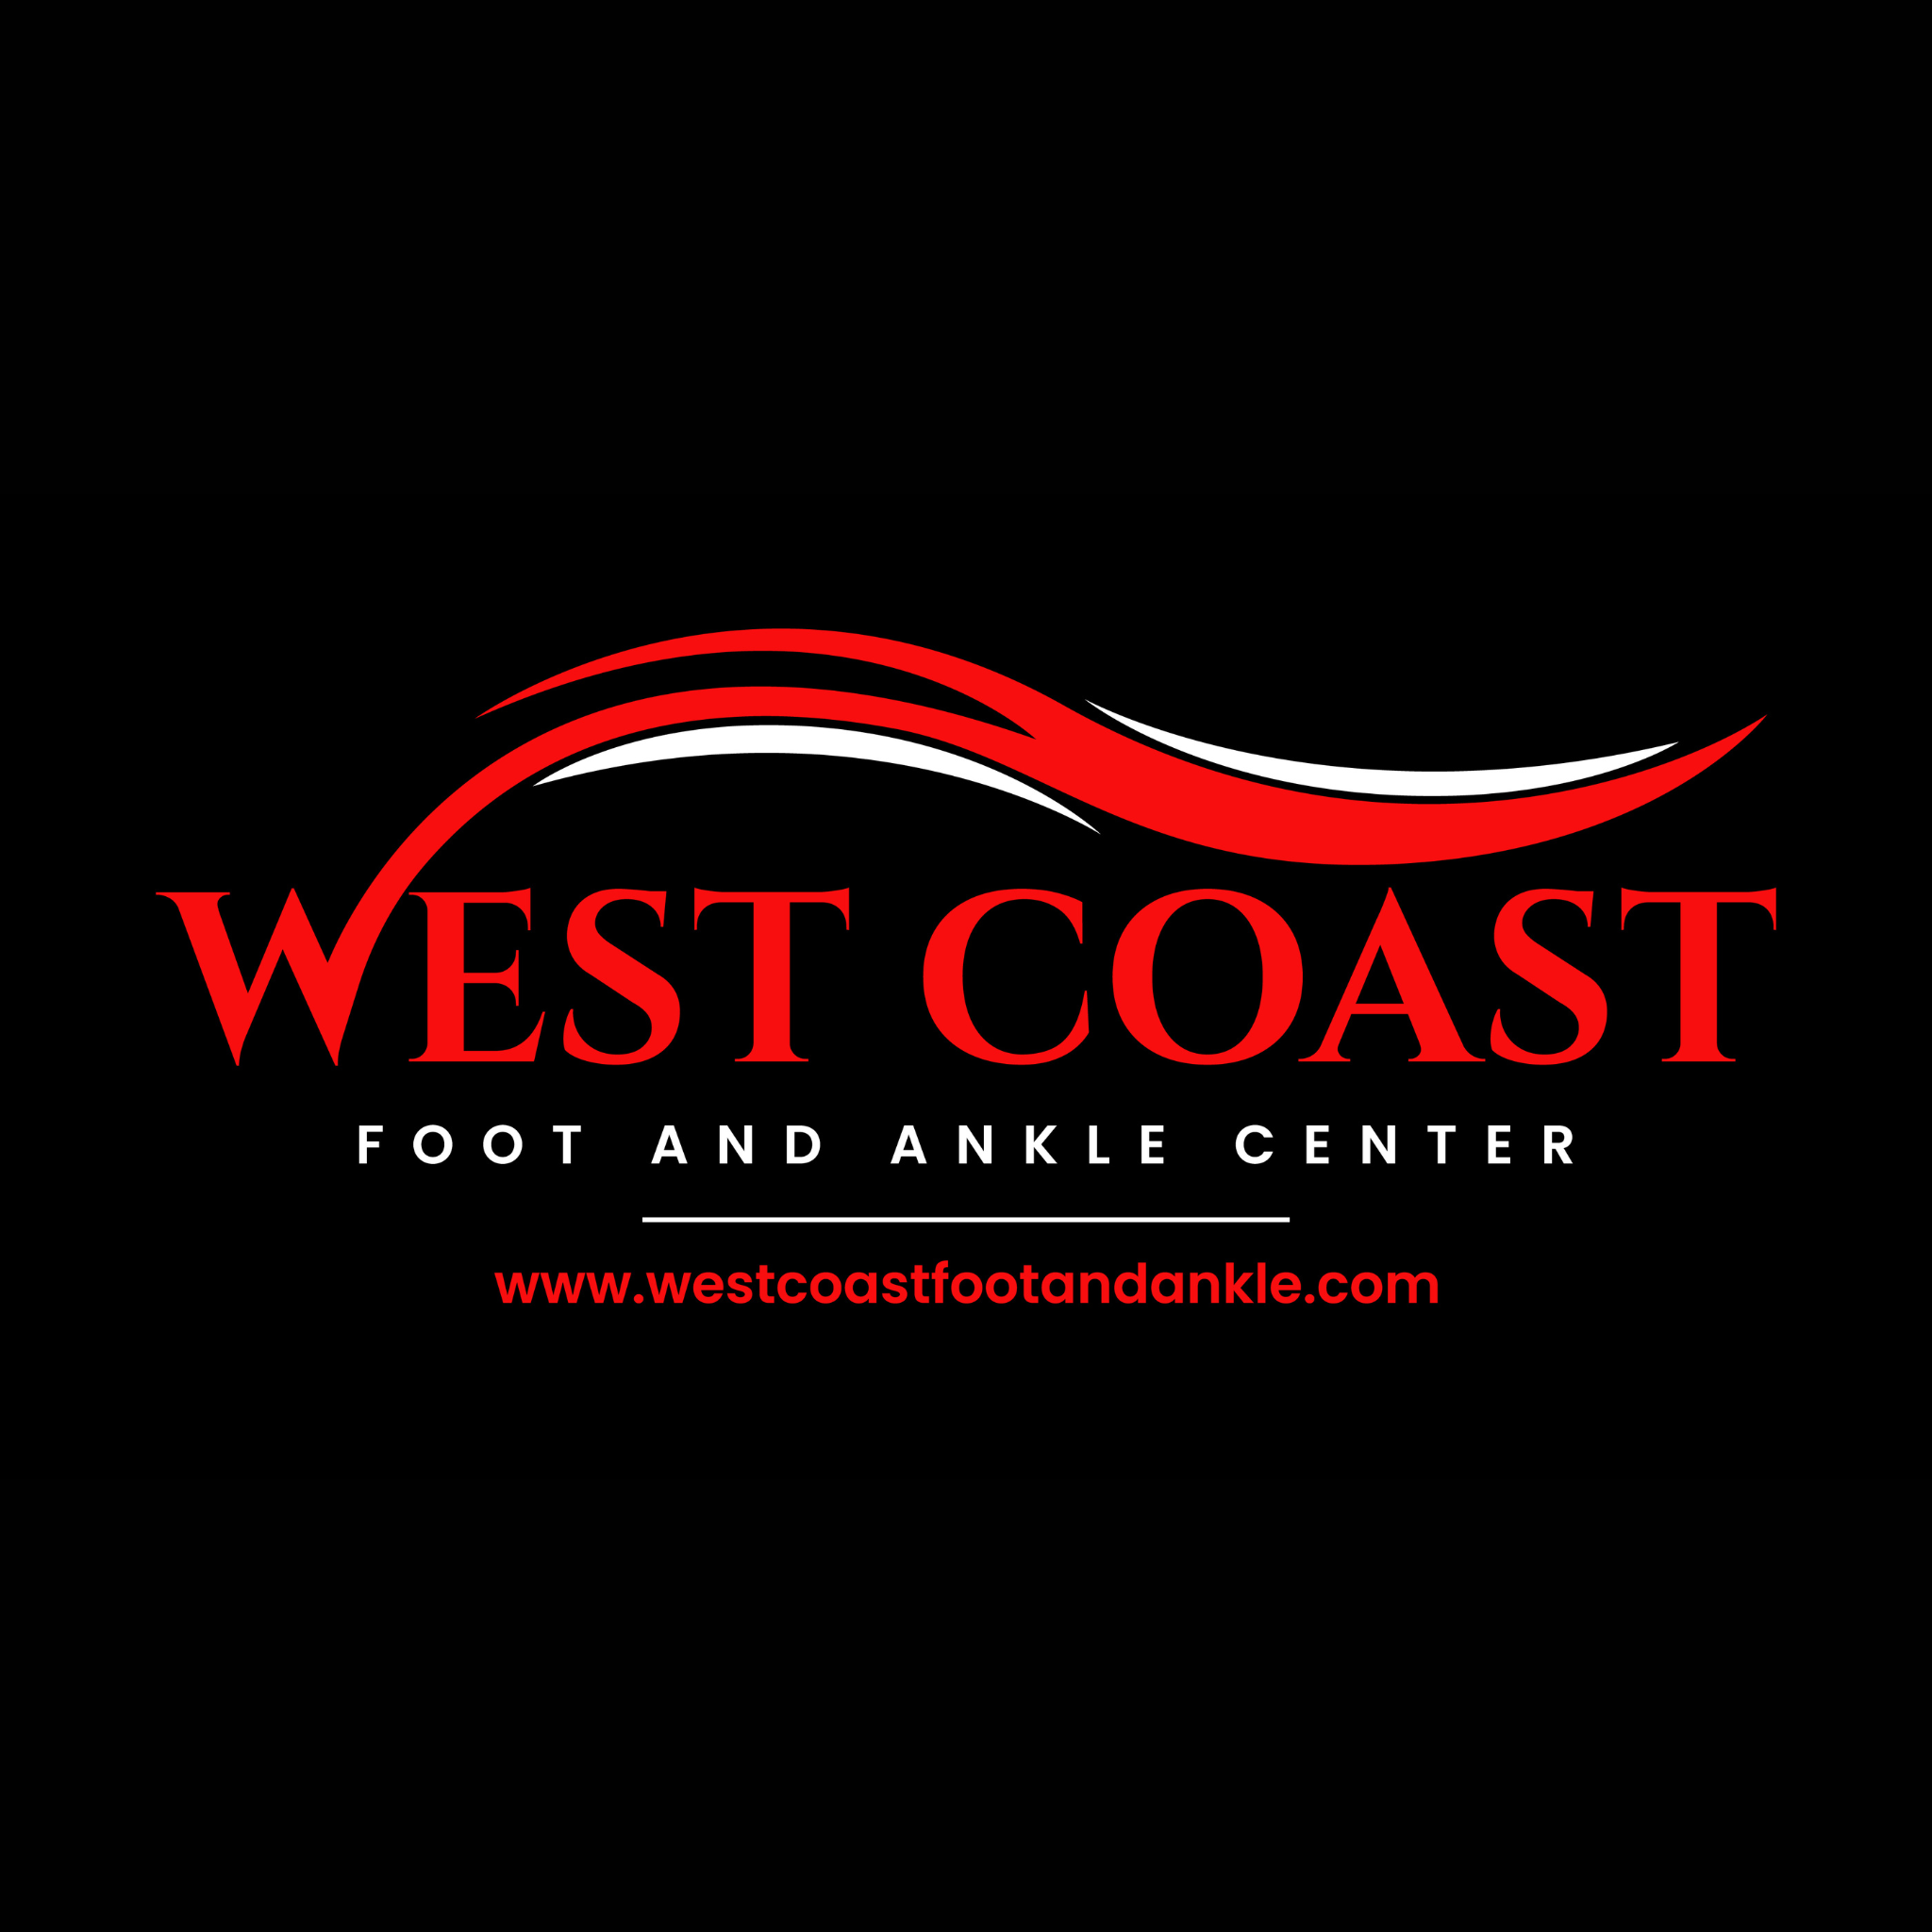 West Coast Foot and Ankle Center